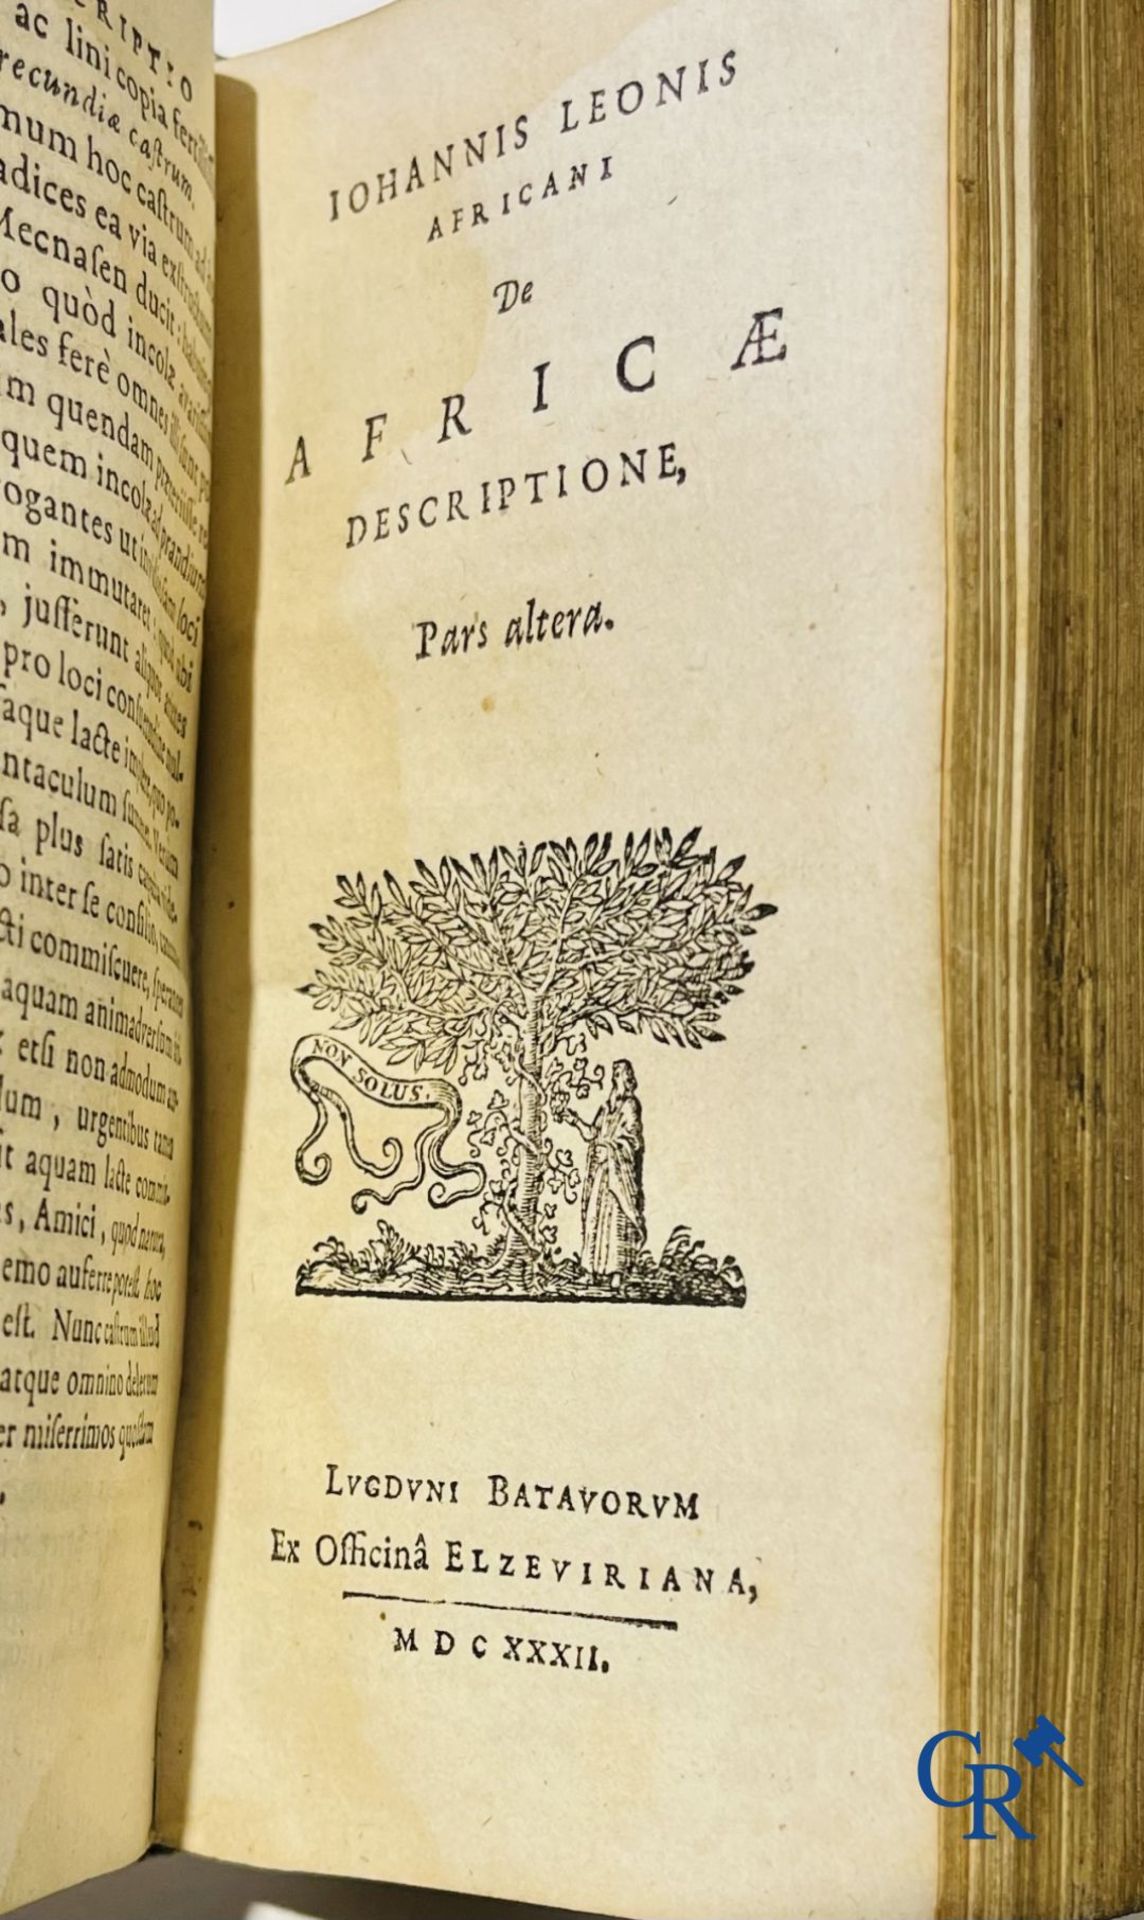 Early printed books: Johannis Leonis Africani. Africae, Elzevier 1632. - Image 3 of 8